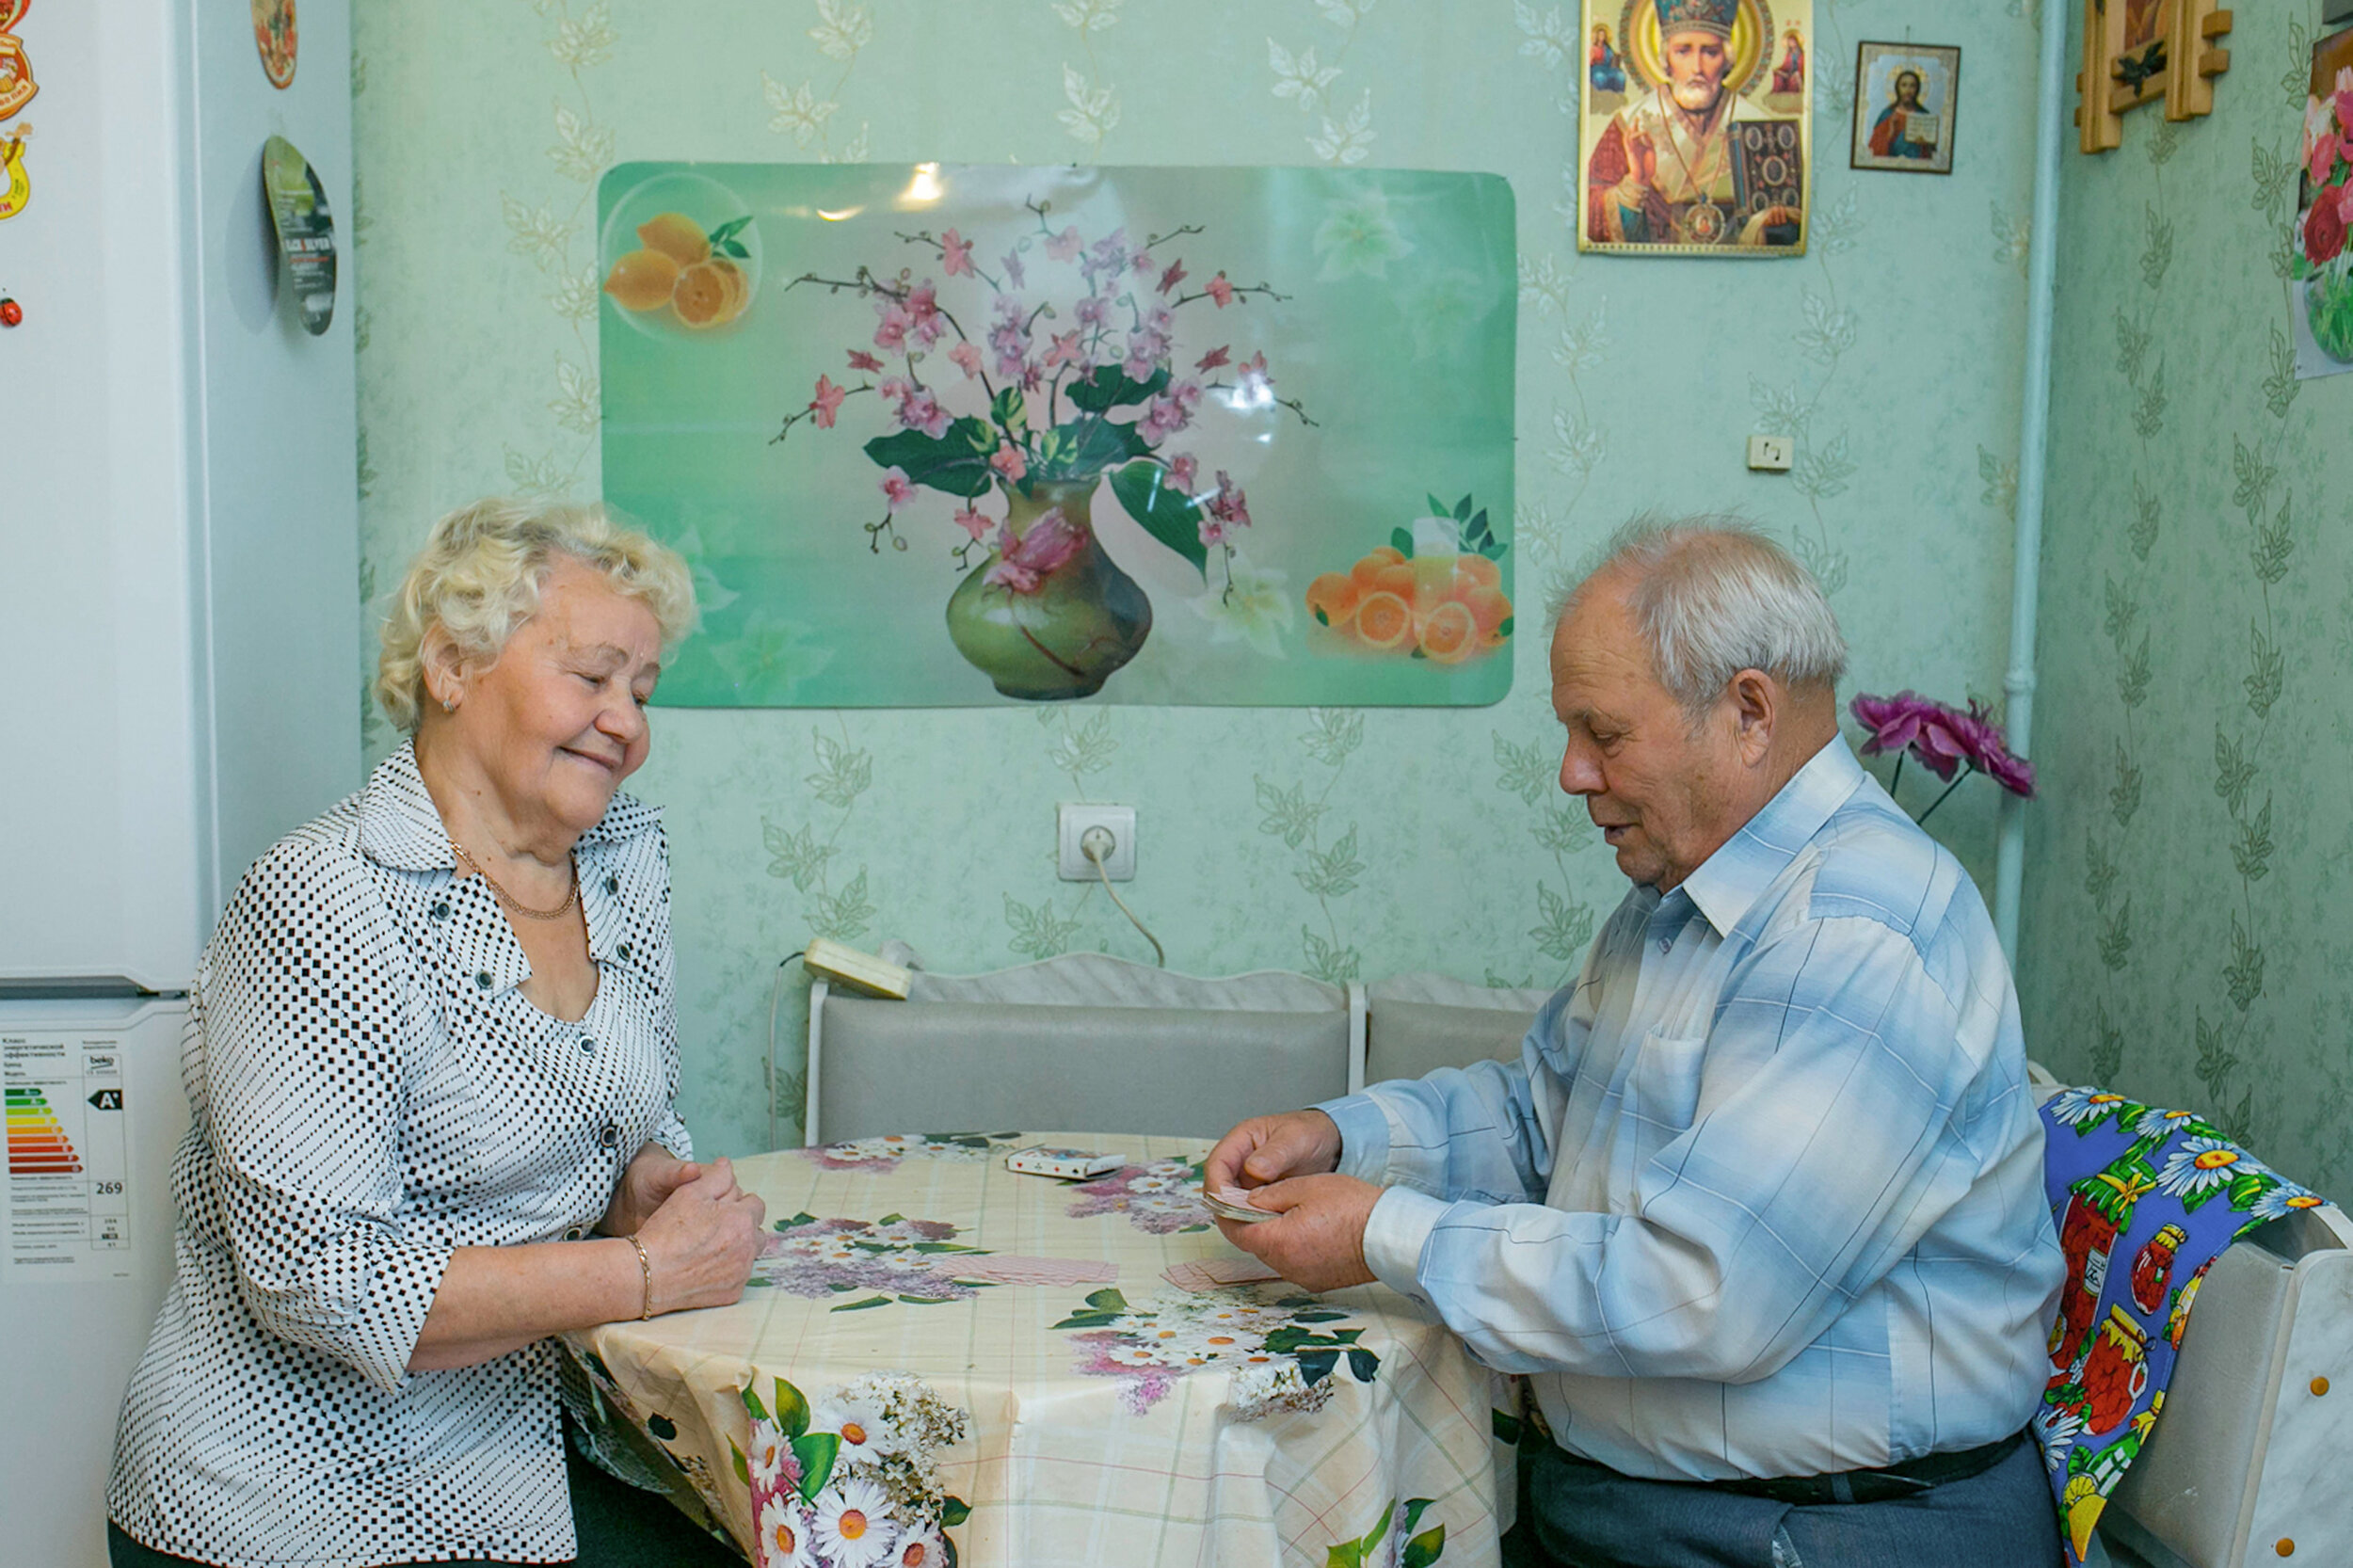  Antonina and Nikolay are playing card game “Durak”. They know each other already for many years and began to date after both became widowed. Antonina and Nikolay often spend time playing card games or watching TV.     